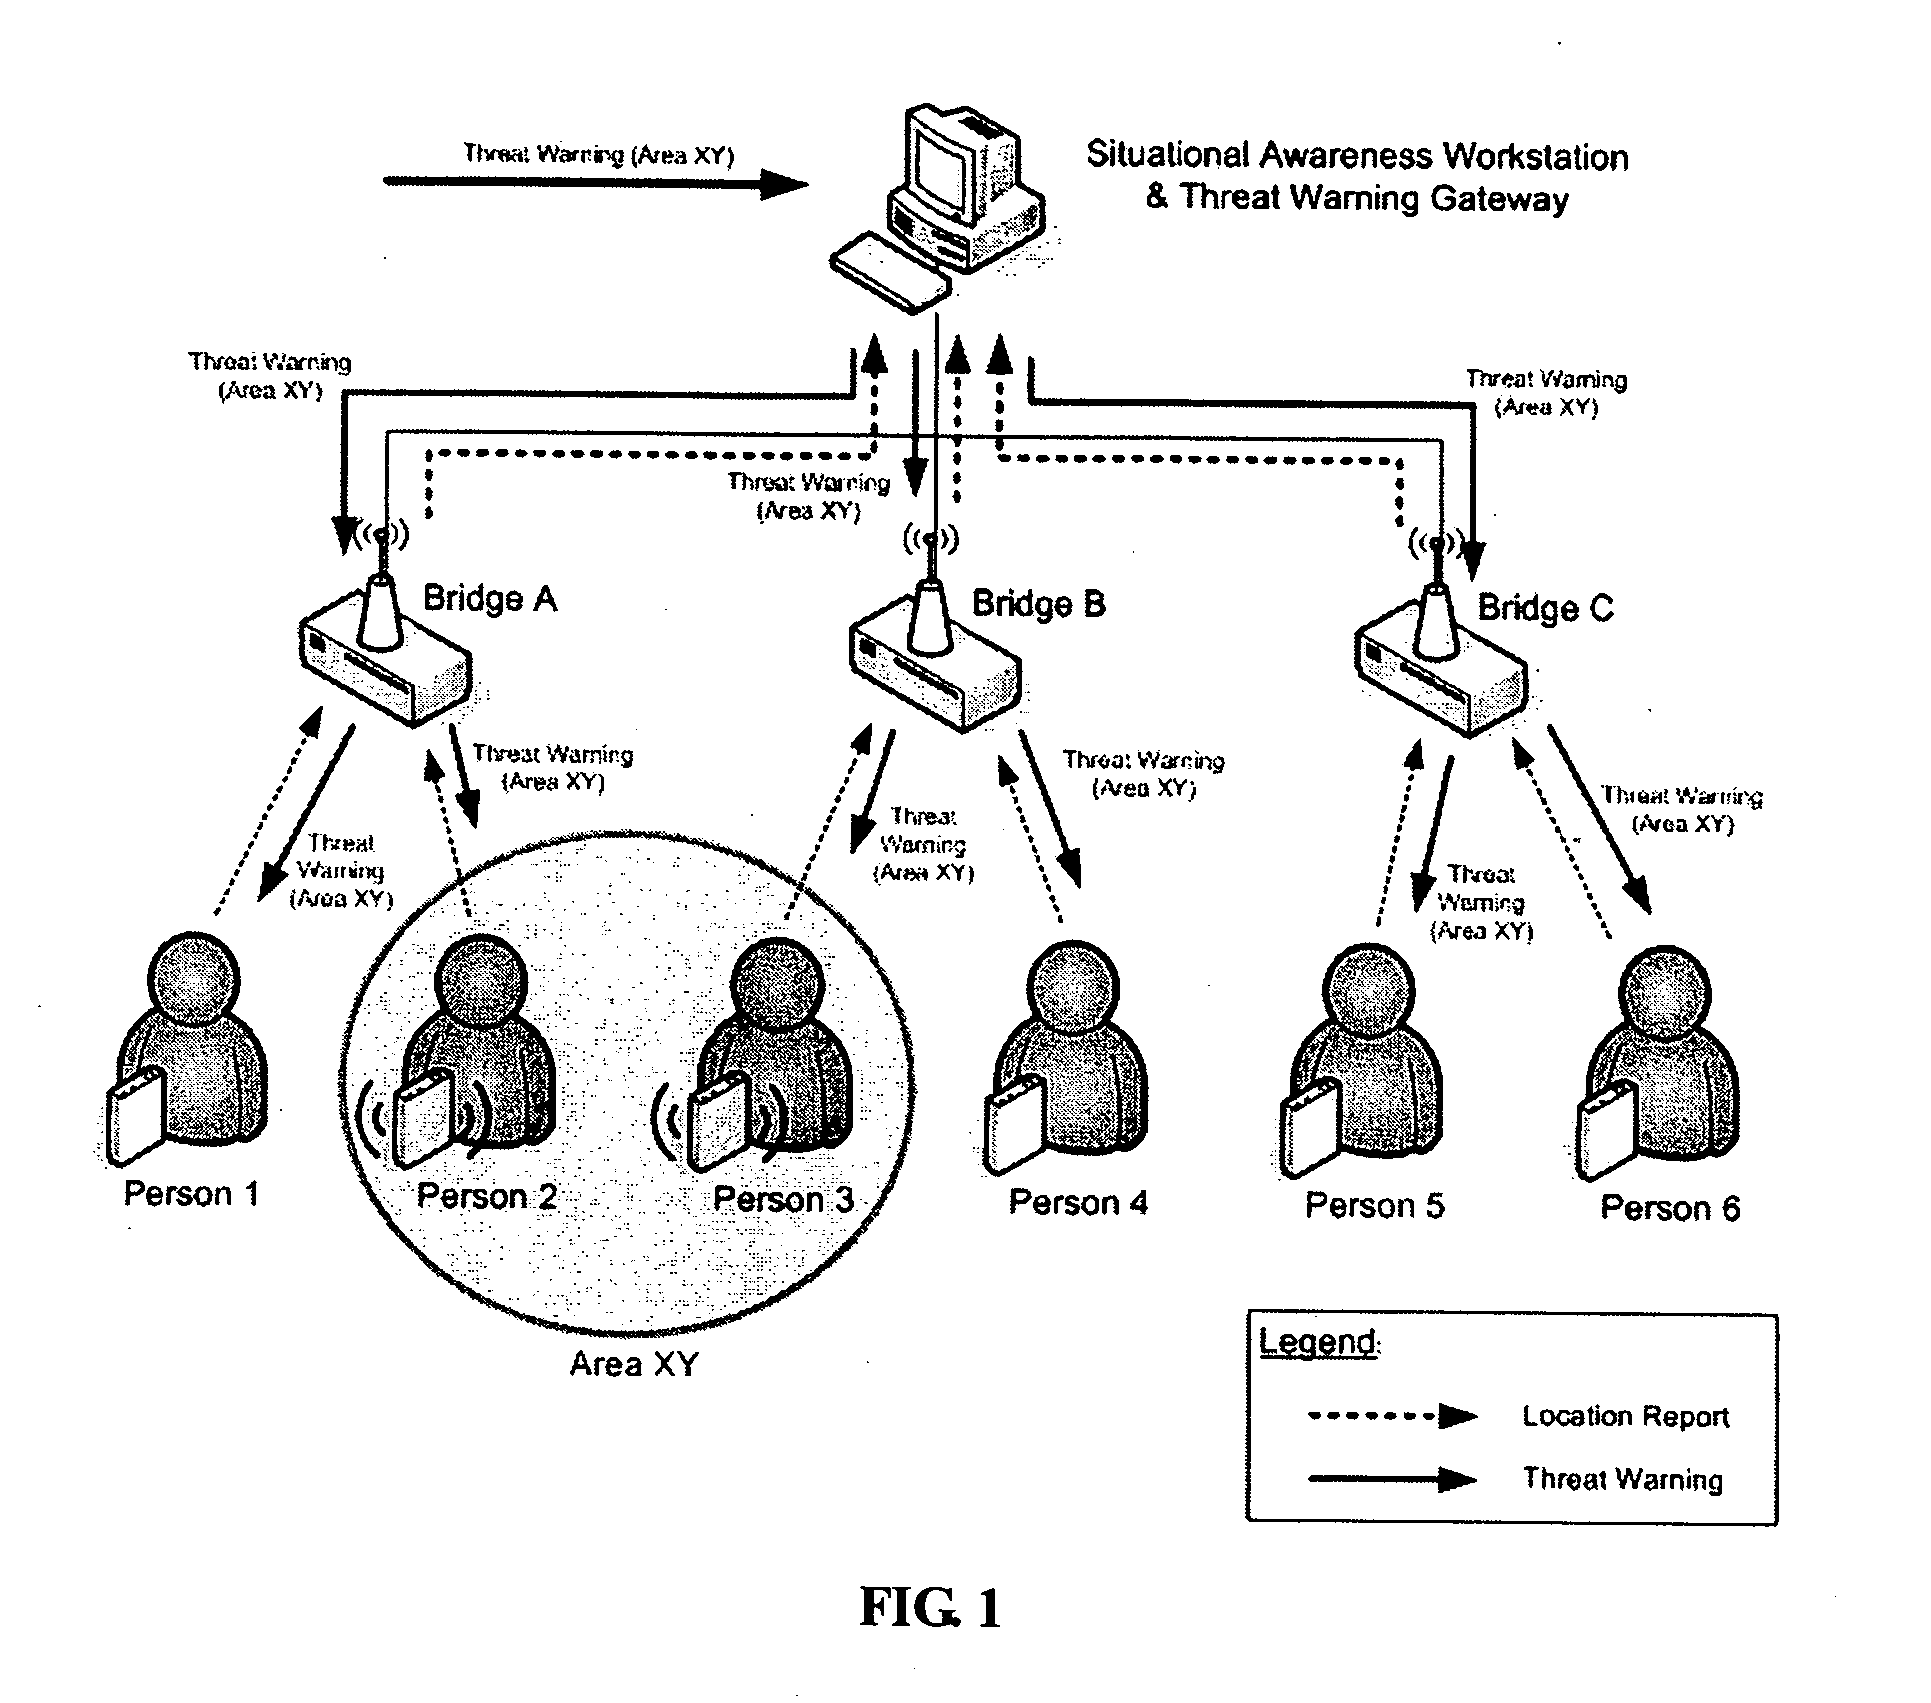 System and method for tactical distributed event warning notification for individual entities, and computer program product therefor